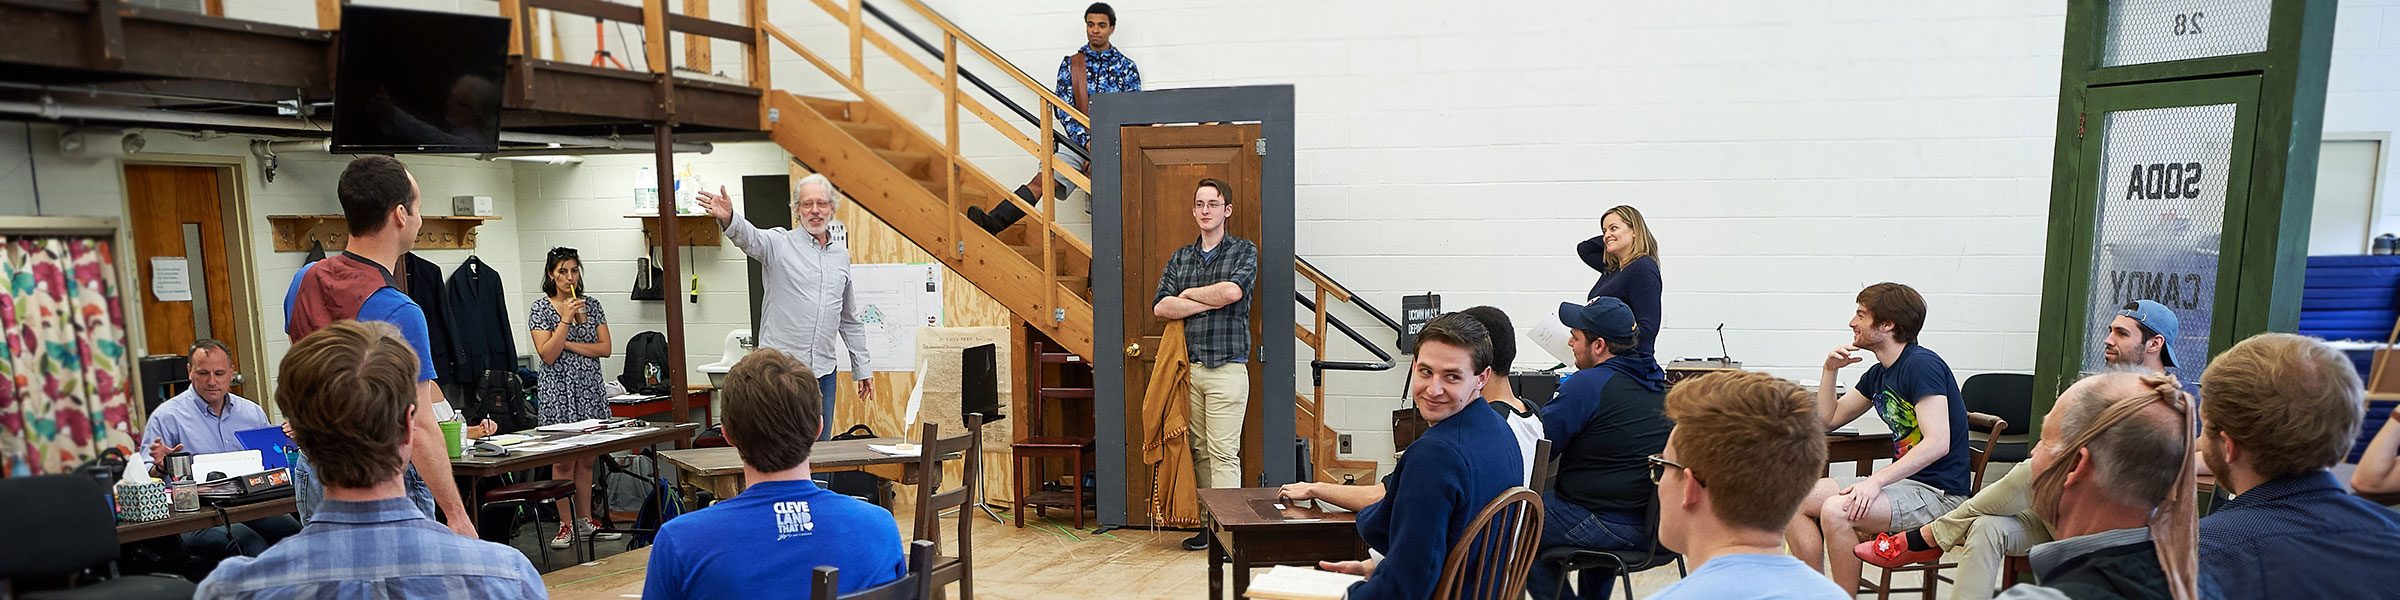 UConn Drama students seated around a professor in a de-constructed set of door-frame props